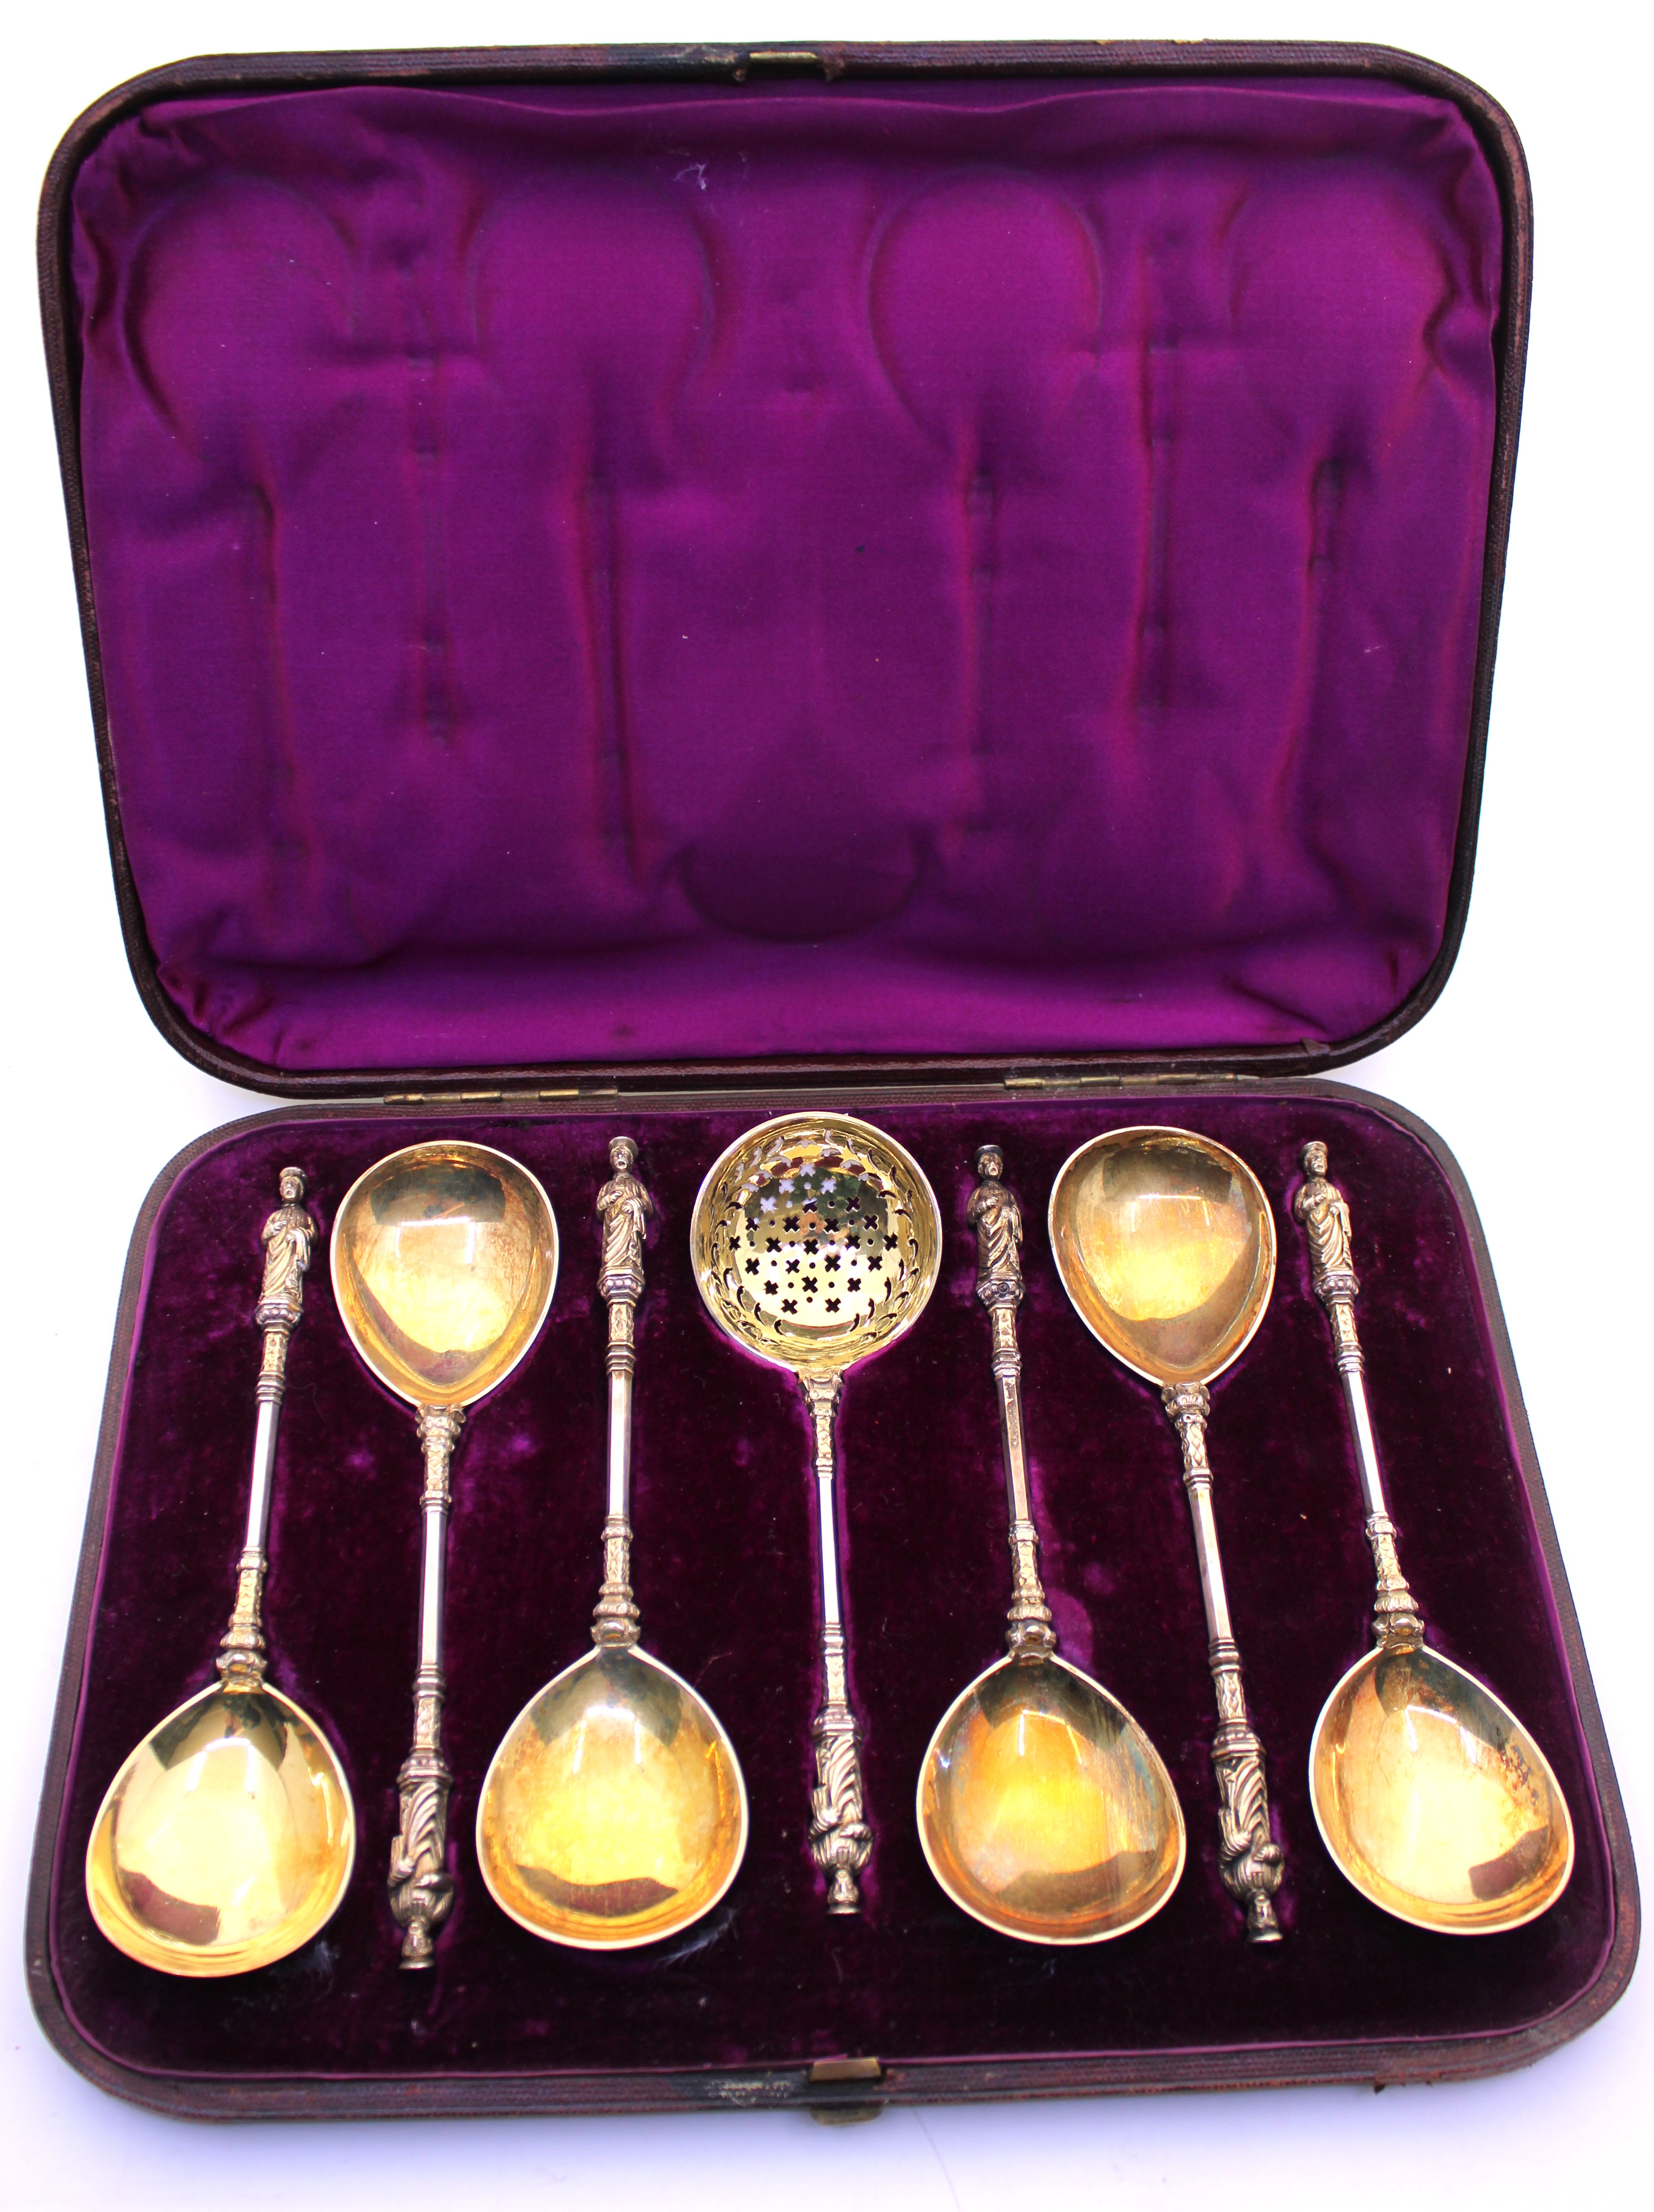 Six Victorian Sterling Silver-Gilt Apostle Spoons and a Sifter Spoon.  They are hallmarked with